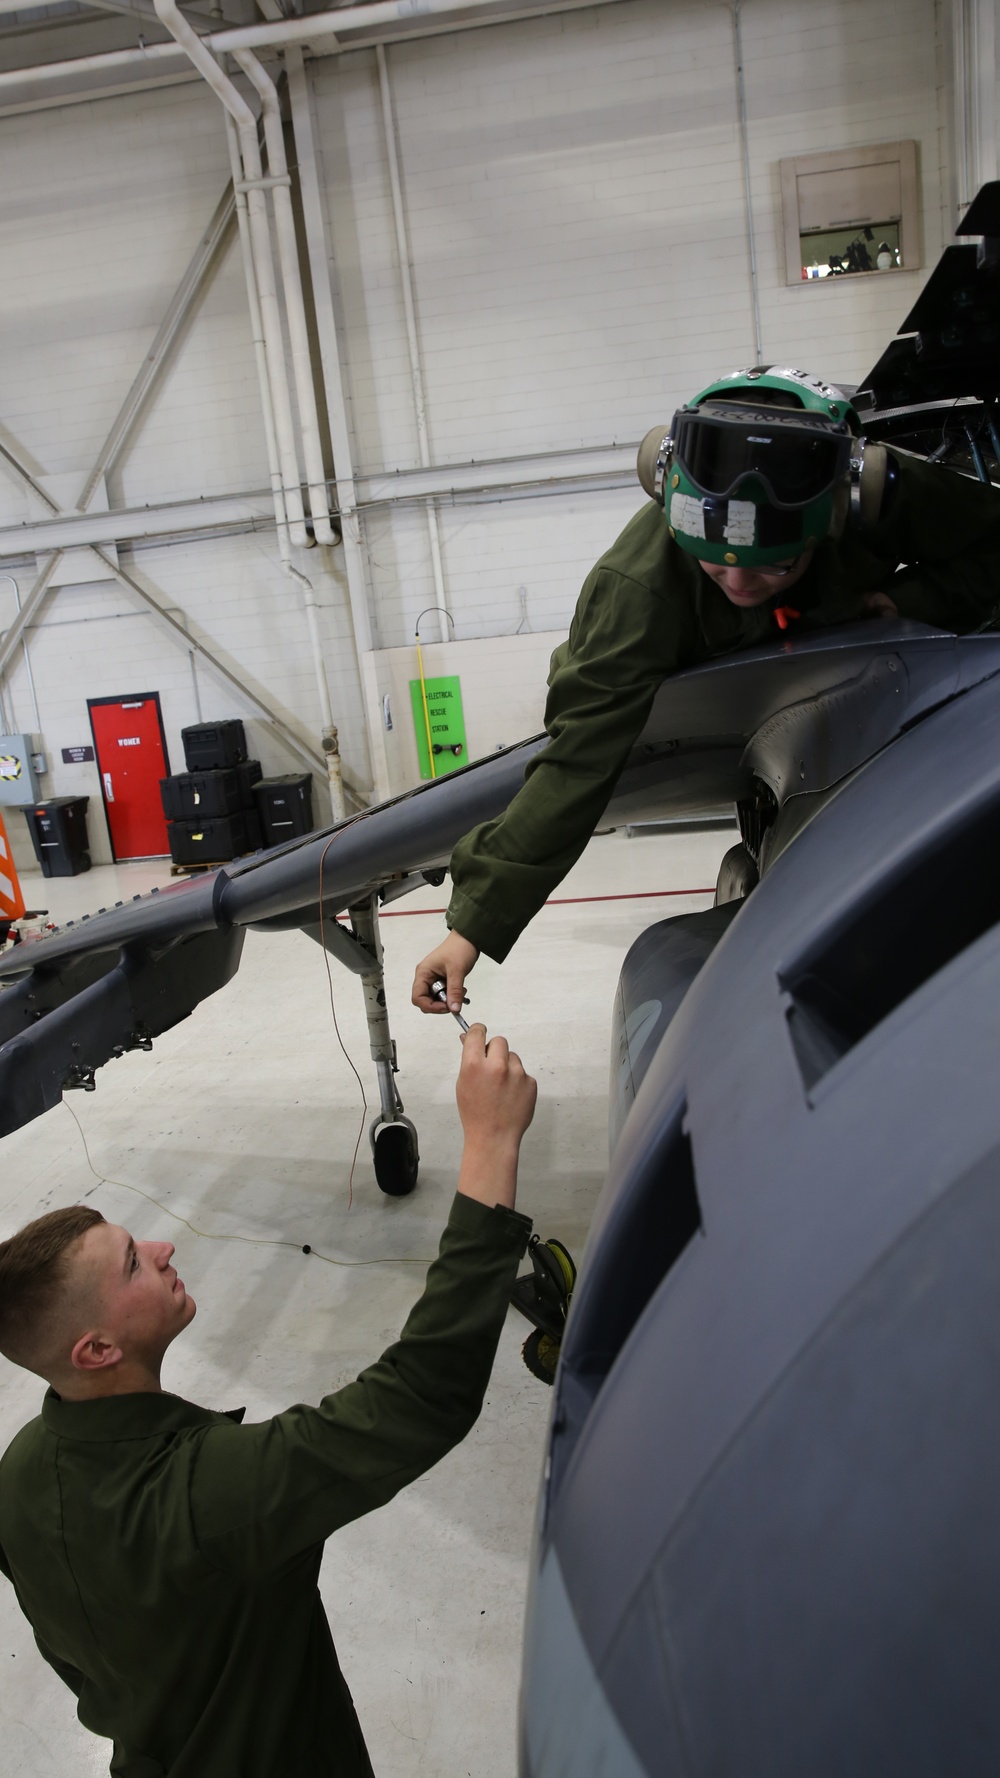 VMAT-203 Marines turn wrenches to support student pilots